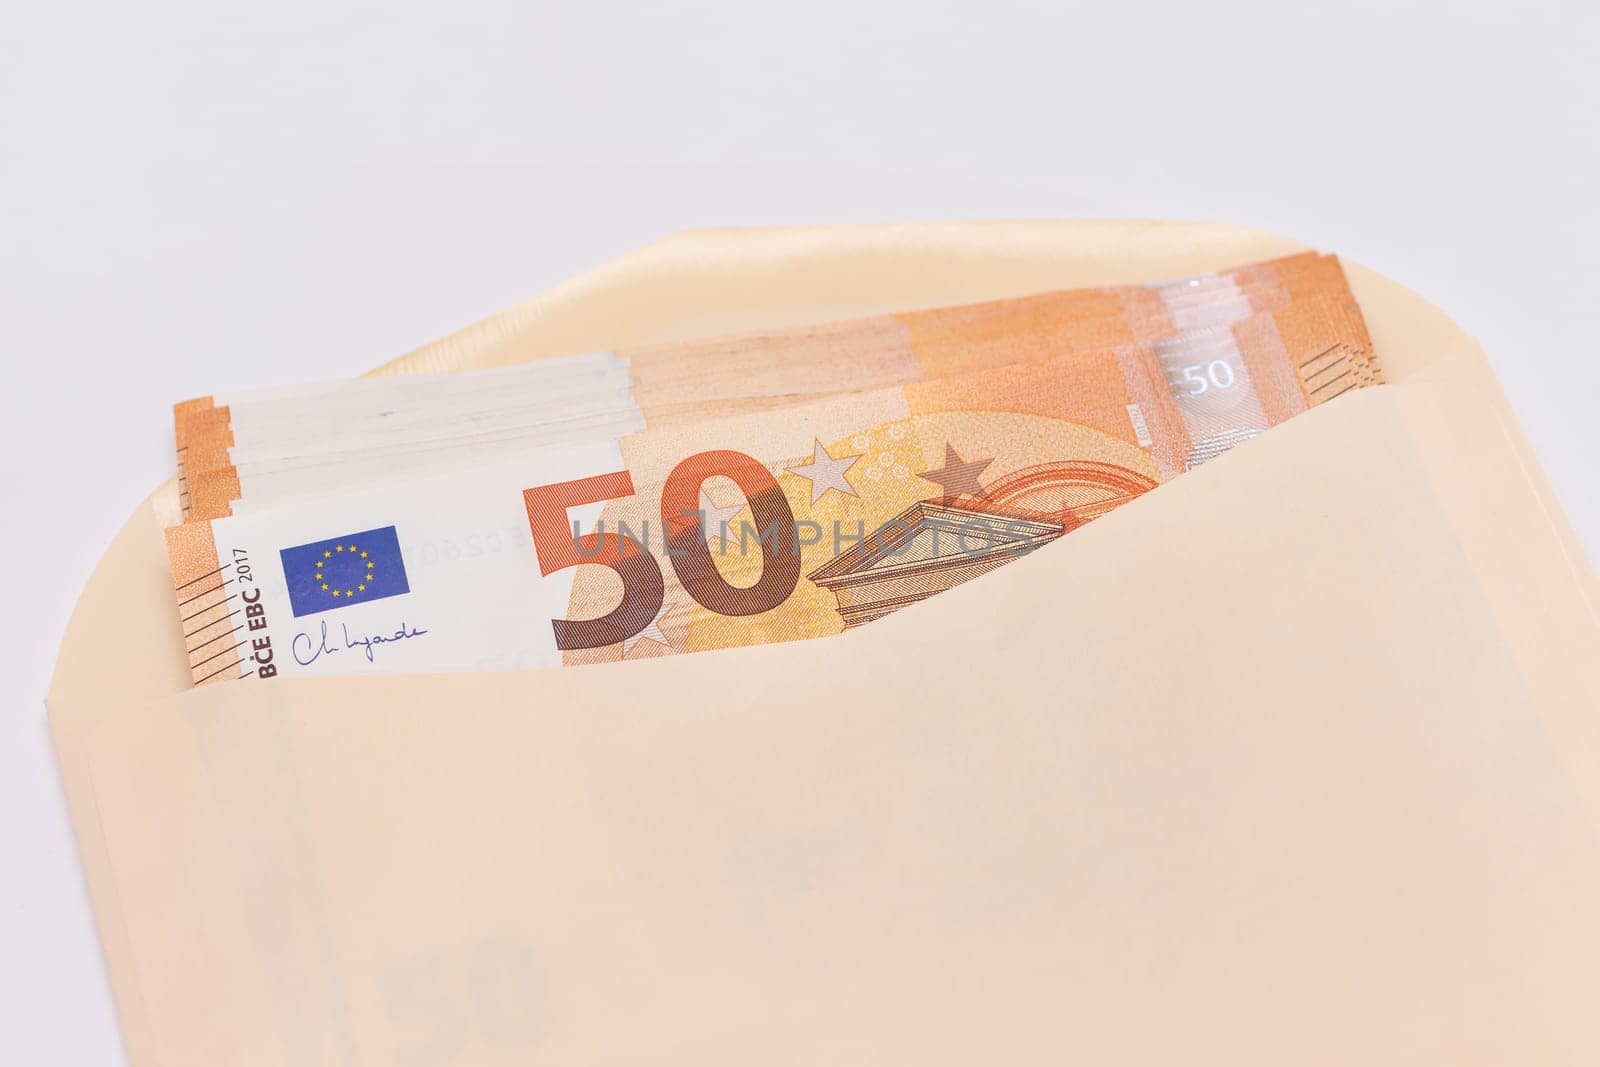 An Orange Paper Envelope with Stack of 50-Euro Banknotes Inside. Salary in Cash. Tax-Free System. Euro Currency. Payments with No Taxes. Orange Paper Money. A Lot of Fifty-Euro Bills